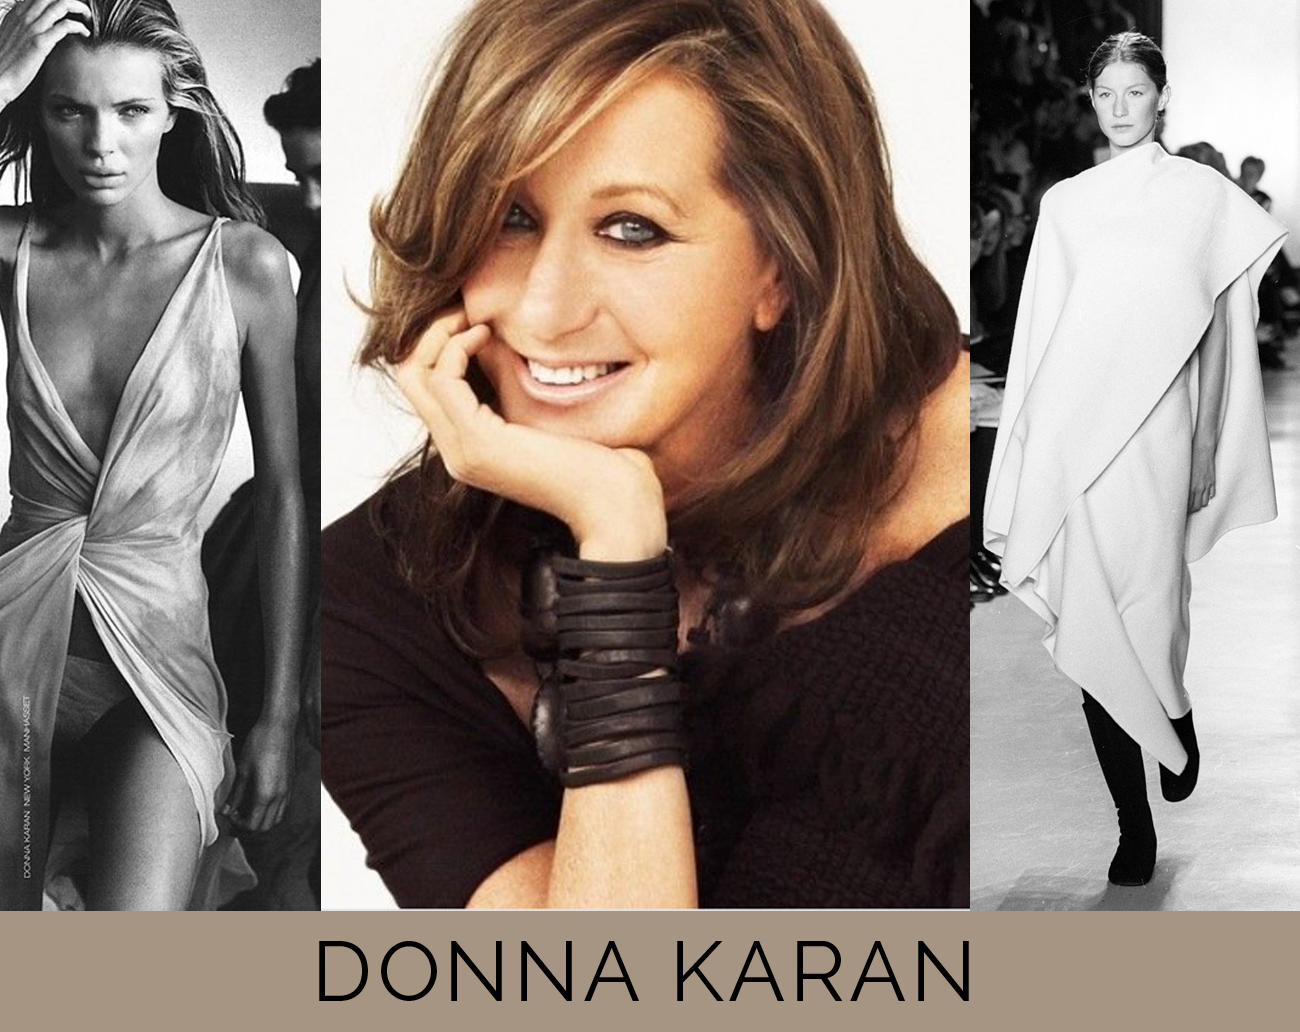 SEE VIDEO! Donna Karan on her spring collection